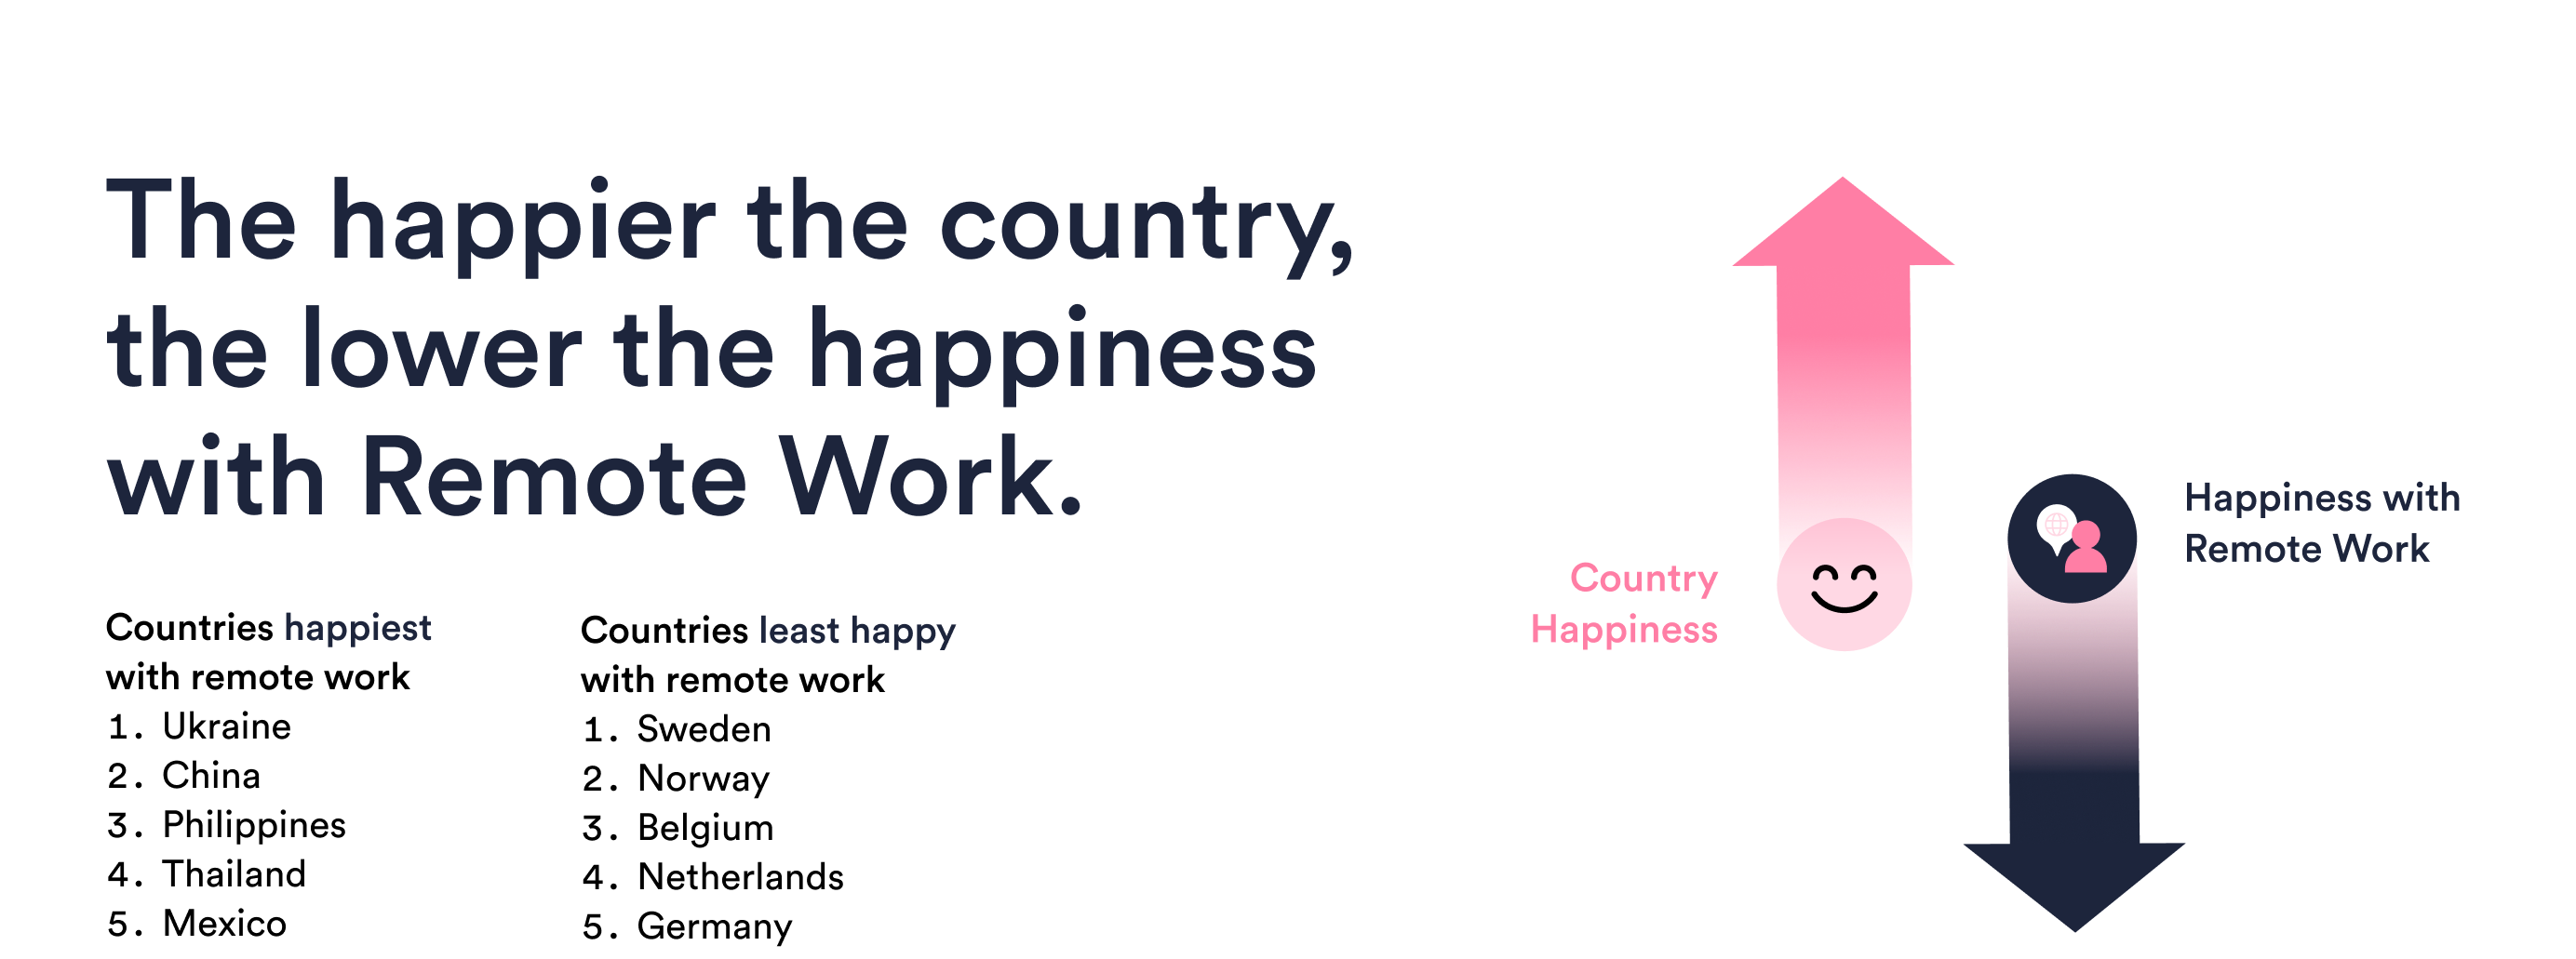 The happier the country, the lower the happiness with Remote Work